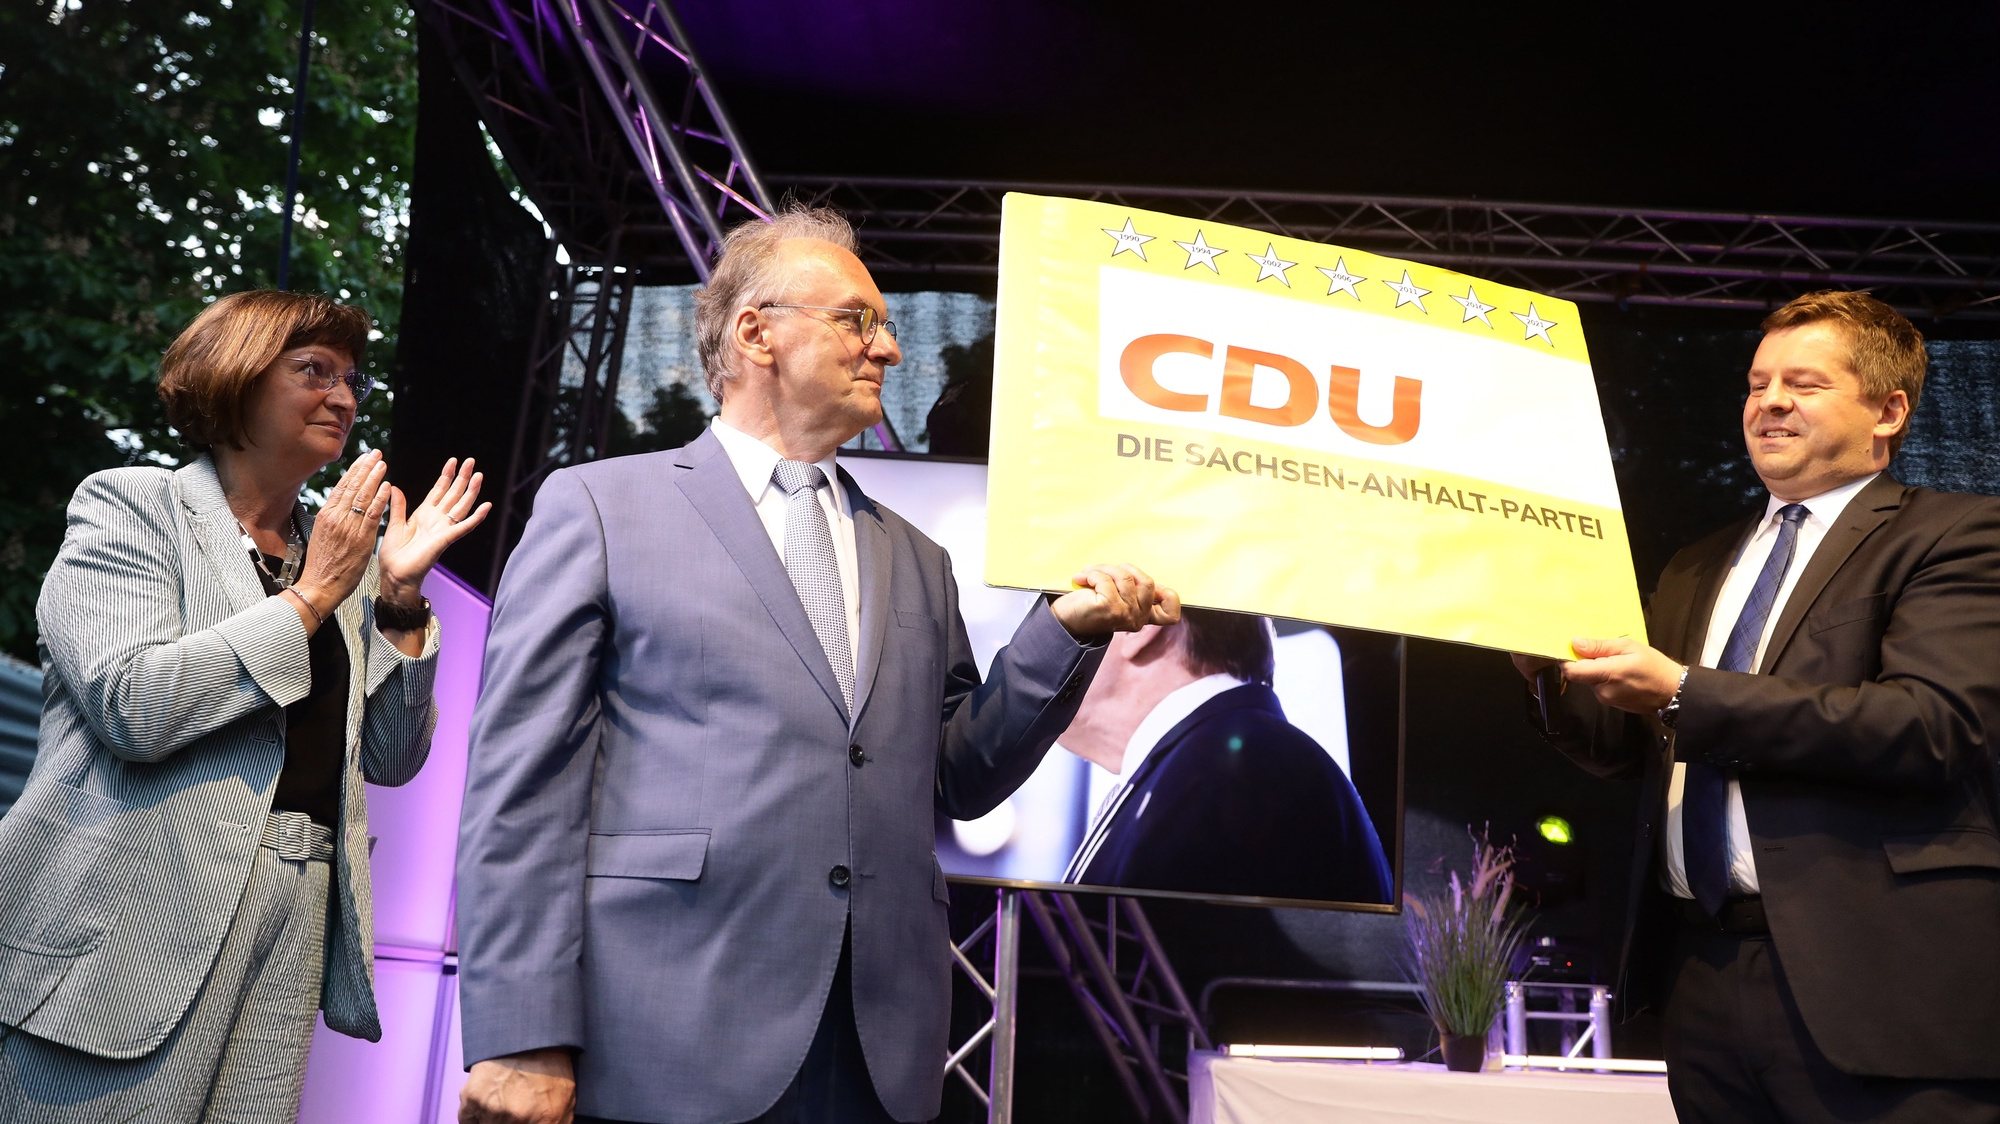 epa09251925 The leading candidate of the German Christian Democratic Party (CDU), Reiner Haseloff (C), his wife Gabriele (L) and the leader of the Saxony-Anhalt CDU, Sven Schulze, hold a poster with the inscription &#039;CDU, The Saxony-Anhalt Party&#039;,  at the election results party of the CDU following the Saxony-Anhalt state elections in Magdeburg, Germany, 06 June 2021. The regional election in Germany&#039;s federal state of Saxony-Anhalt is the last before general elections in September and is considered a trend indicator.  EPA/FILIP SINGER